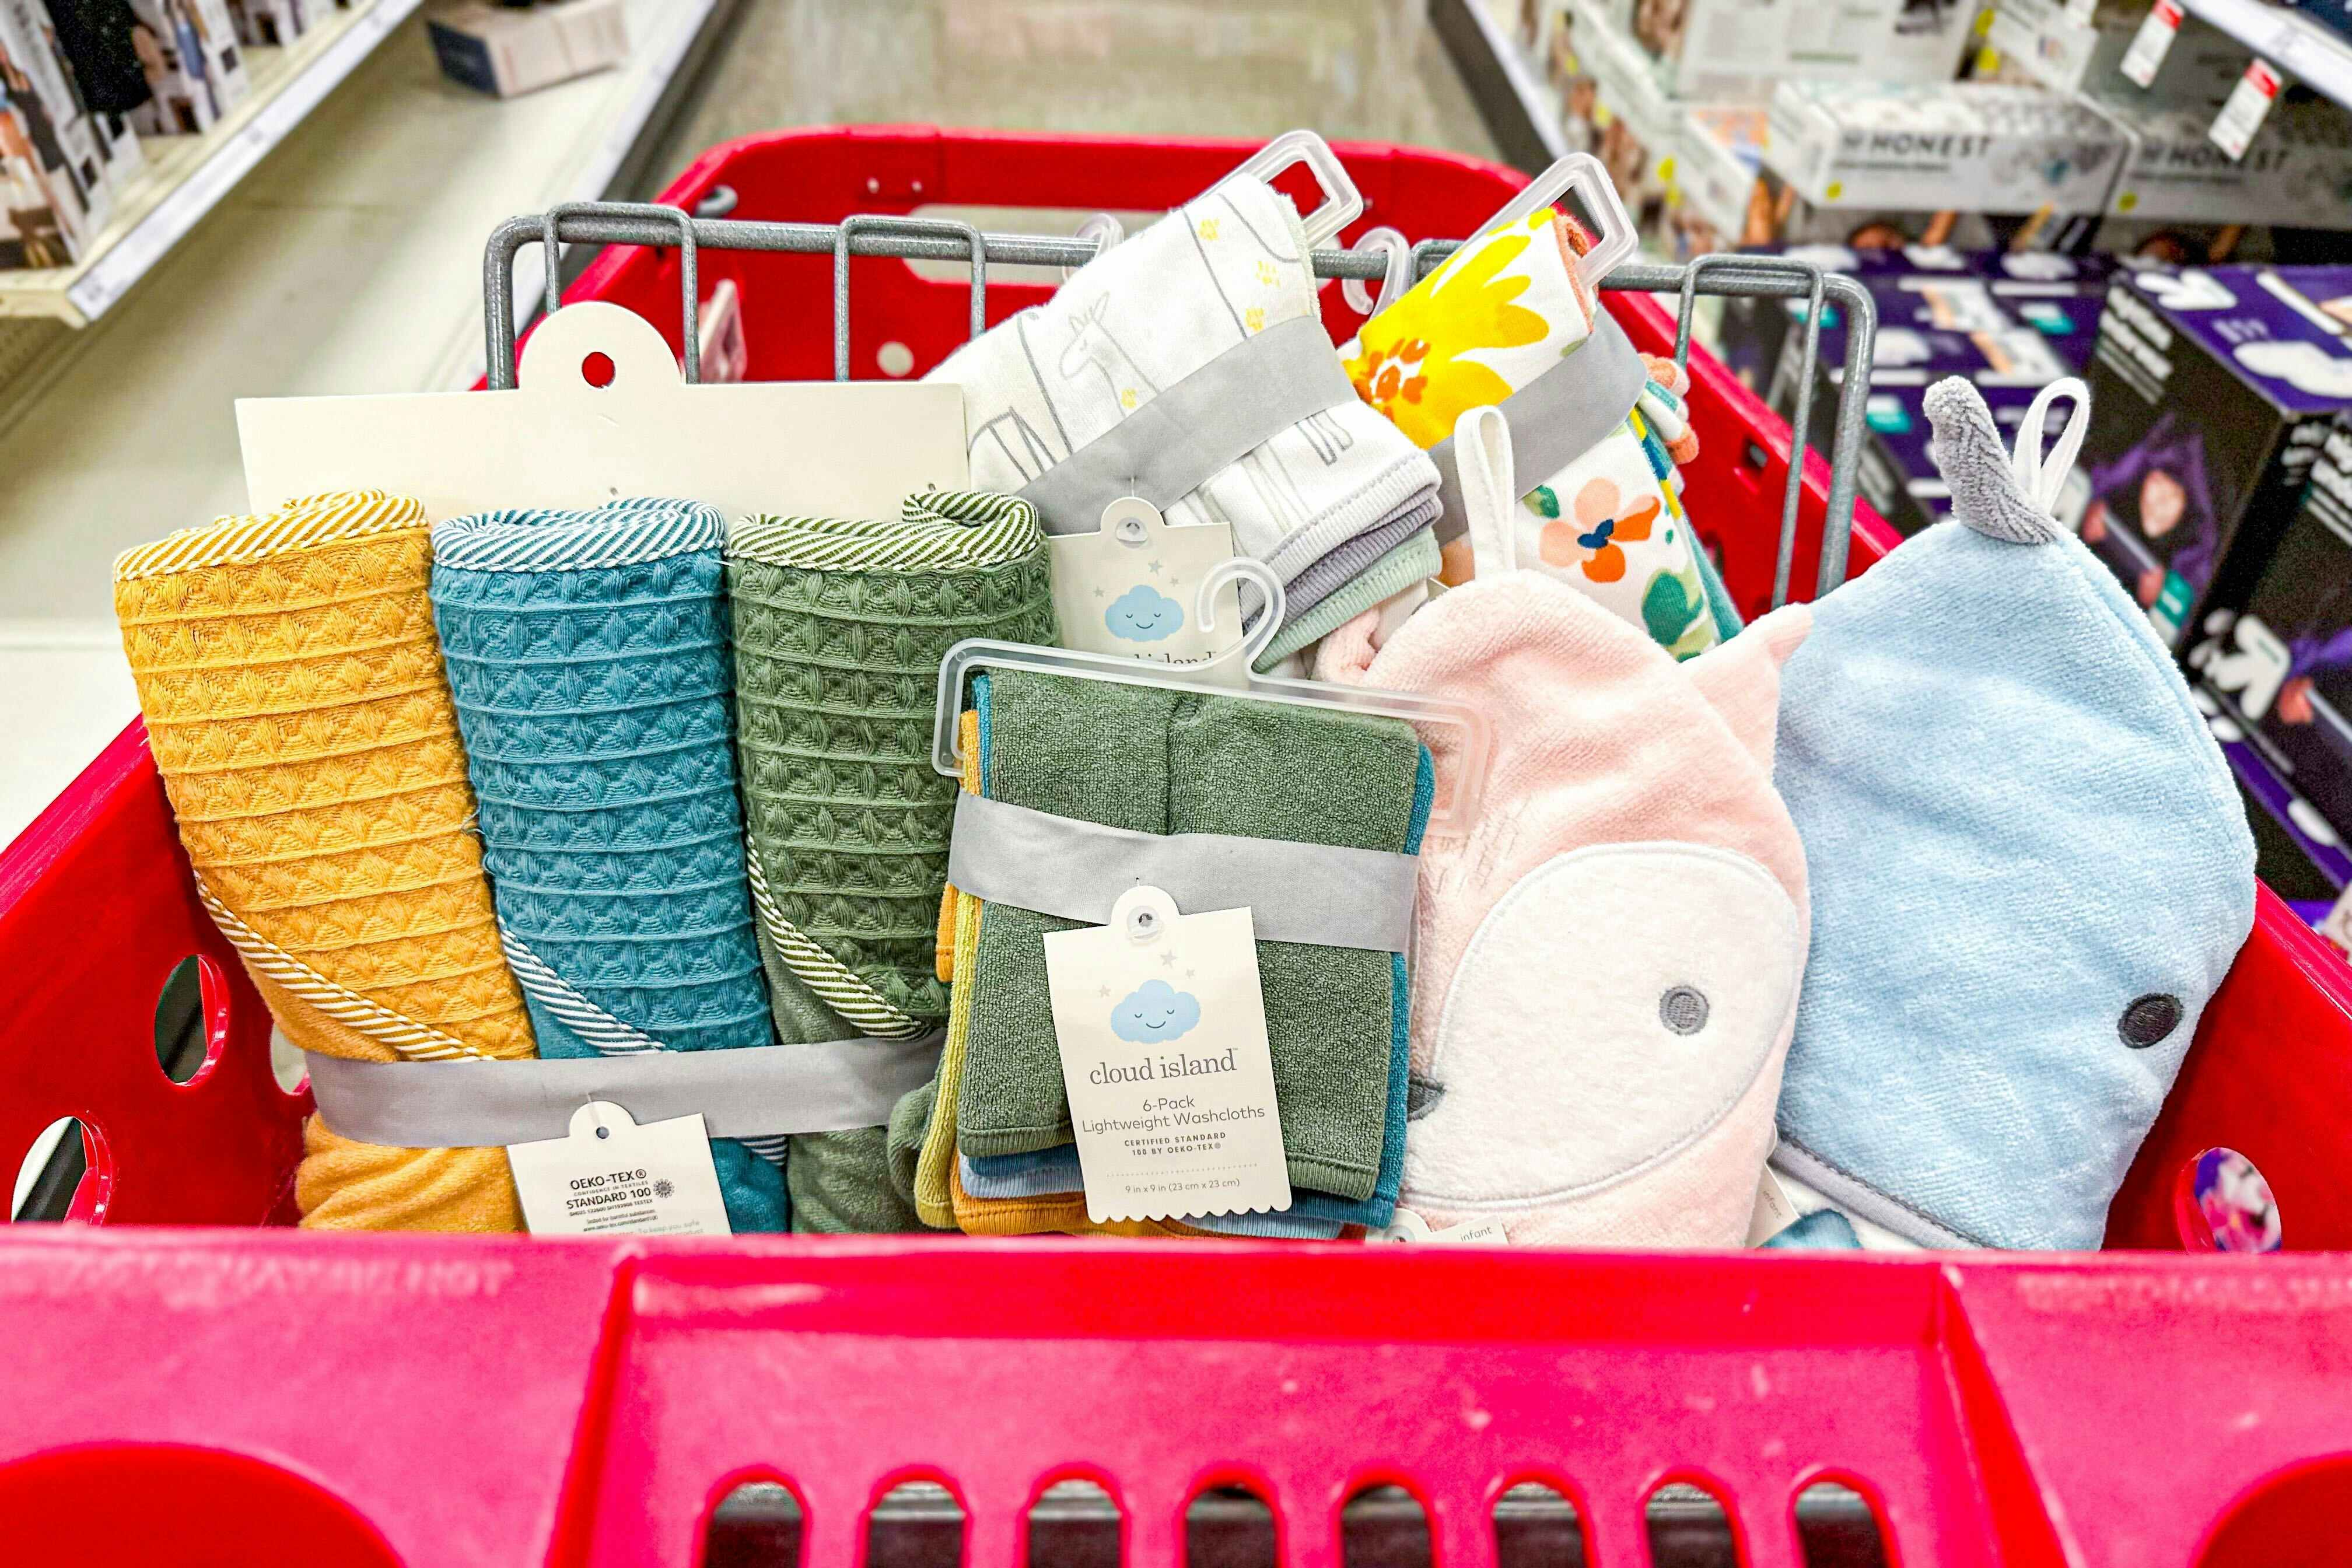 $0.57 Cloud Island Baby Washcloths and $3.80 Hooded Towels at Target